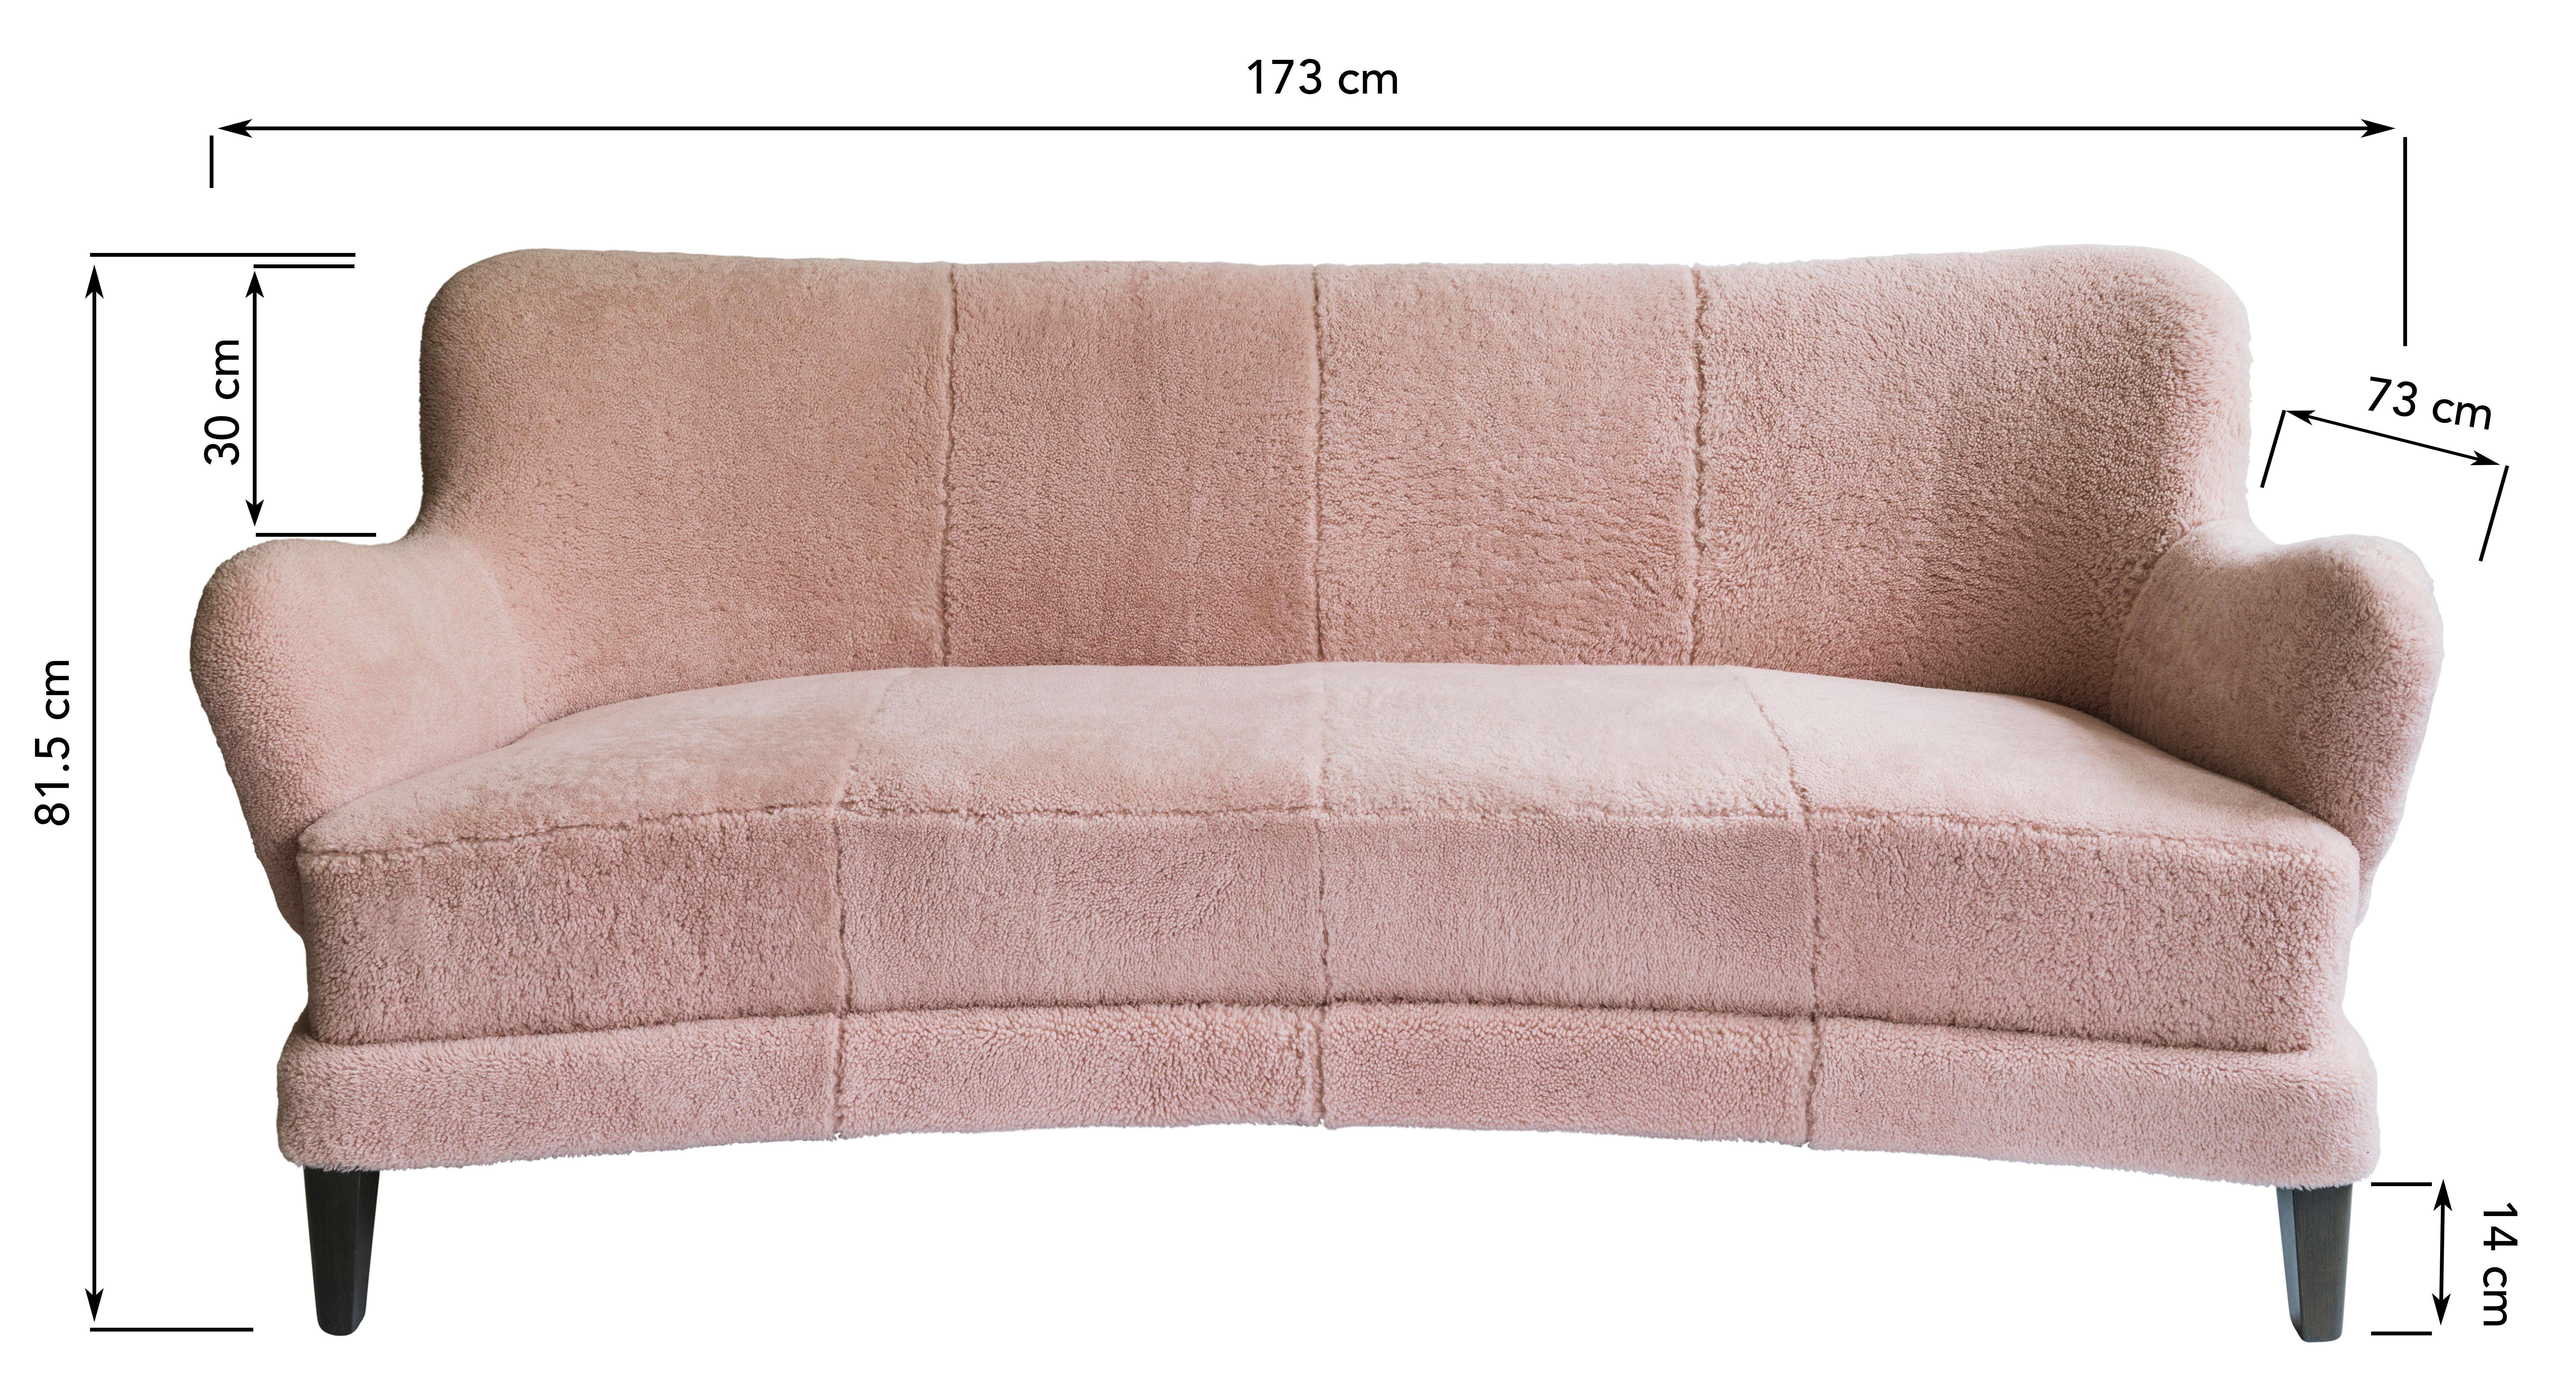 Mid-Century Modern Contemporary Eclipse Curved Sofa in Pink Sheepskin and Suede Upholstery For Sale